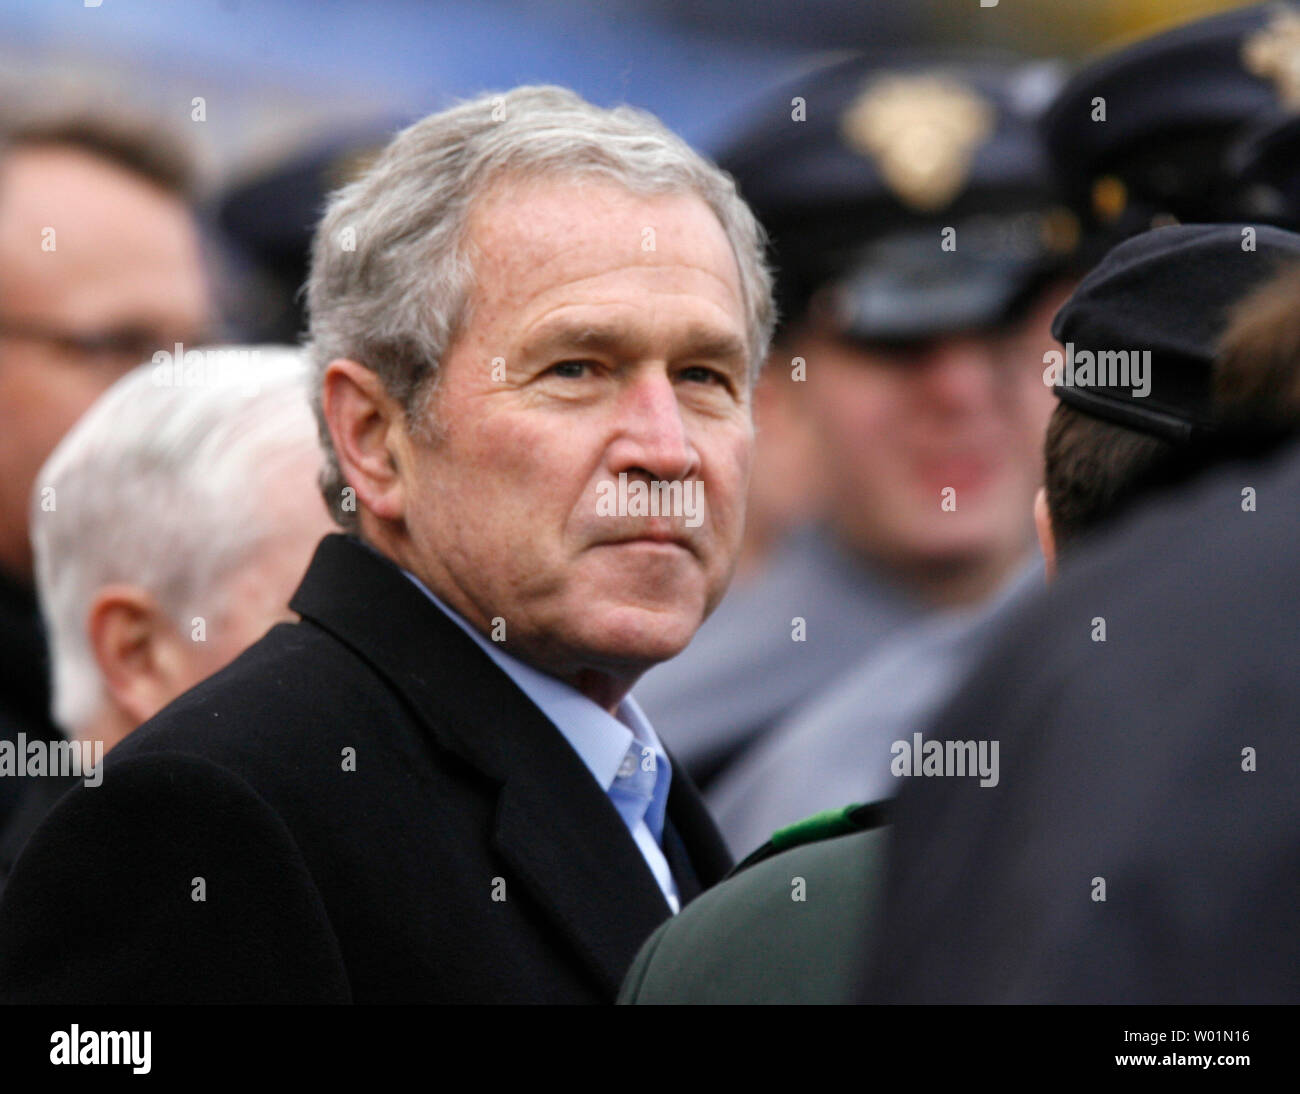 U.S. President George W. Bush watches the annual Army-Navy game at Lincoln Financial Field in Philadelphia on December 6, 2008.      (UPI Photo/John Anderson) Stock Photo